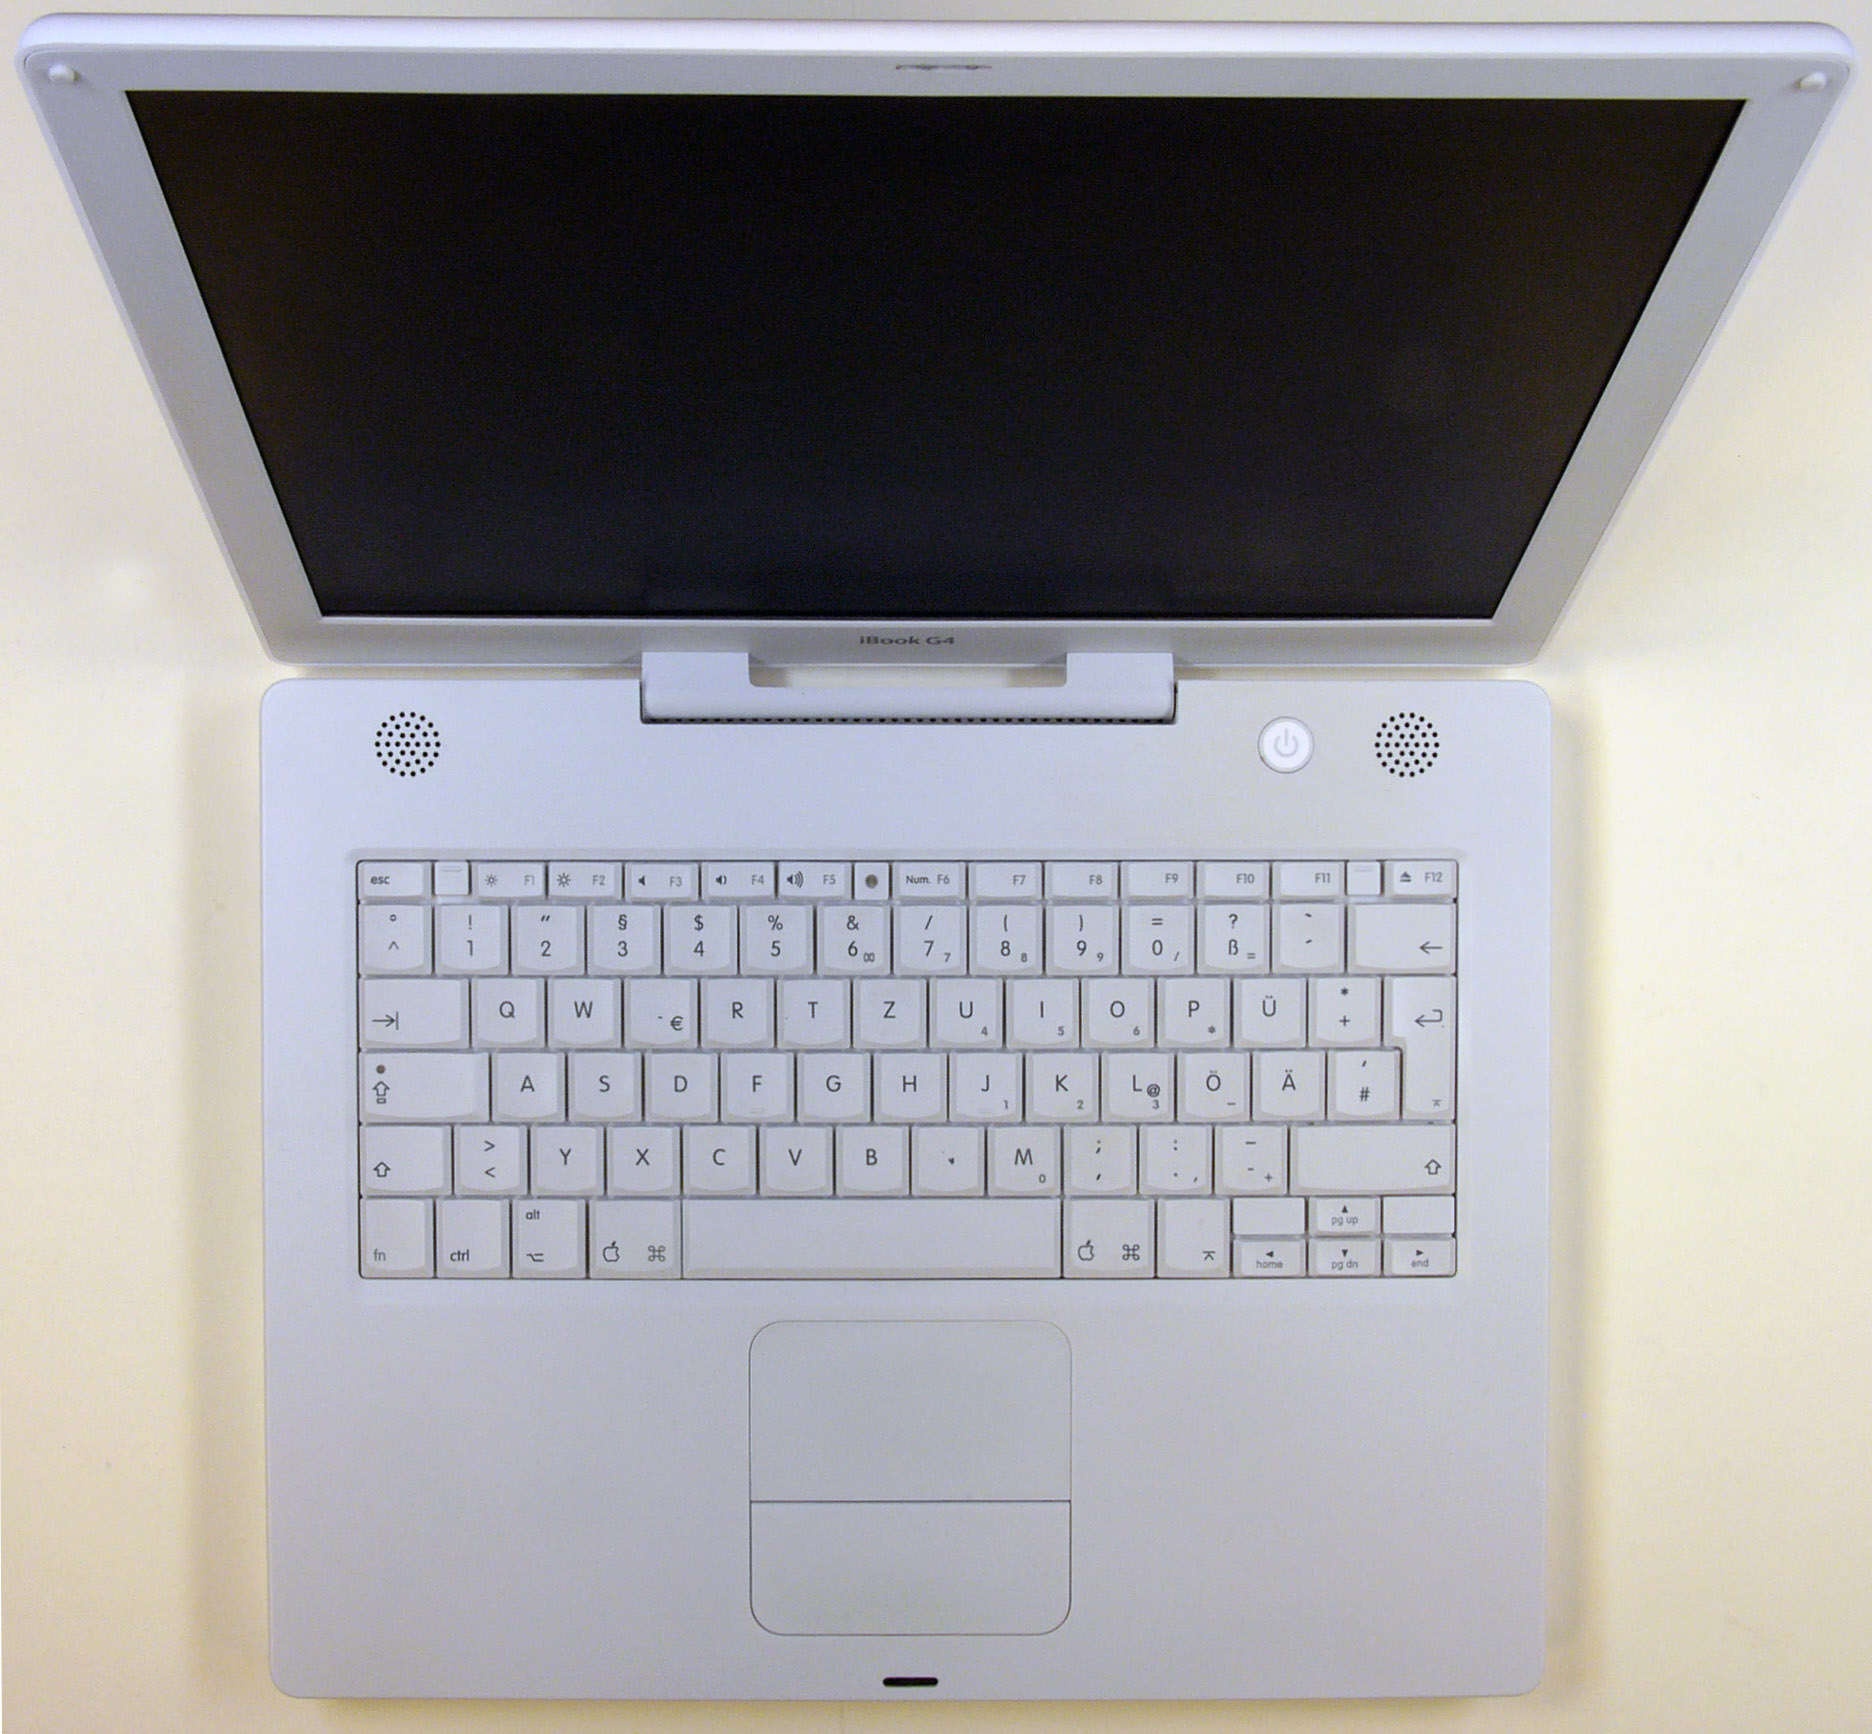 Rugged and pearly white, the iBook G4 becomes the last of its line.